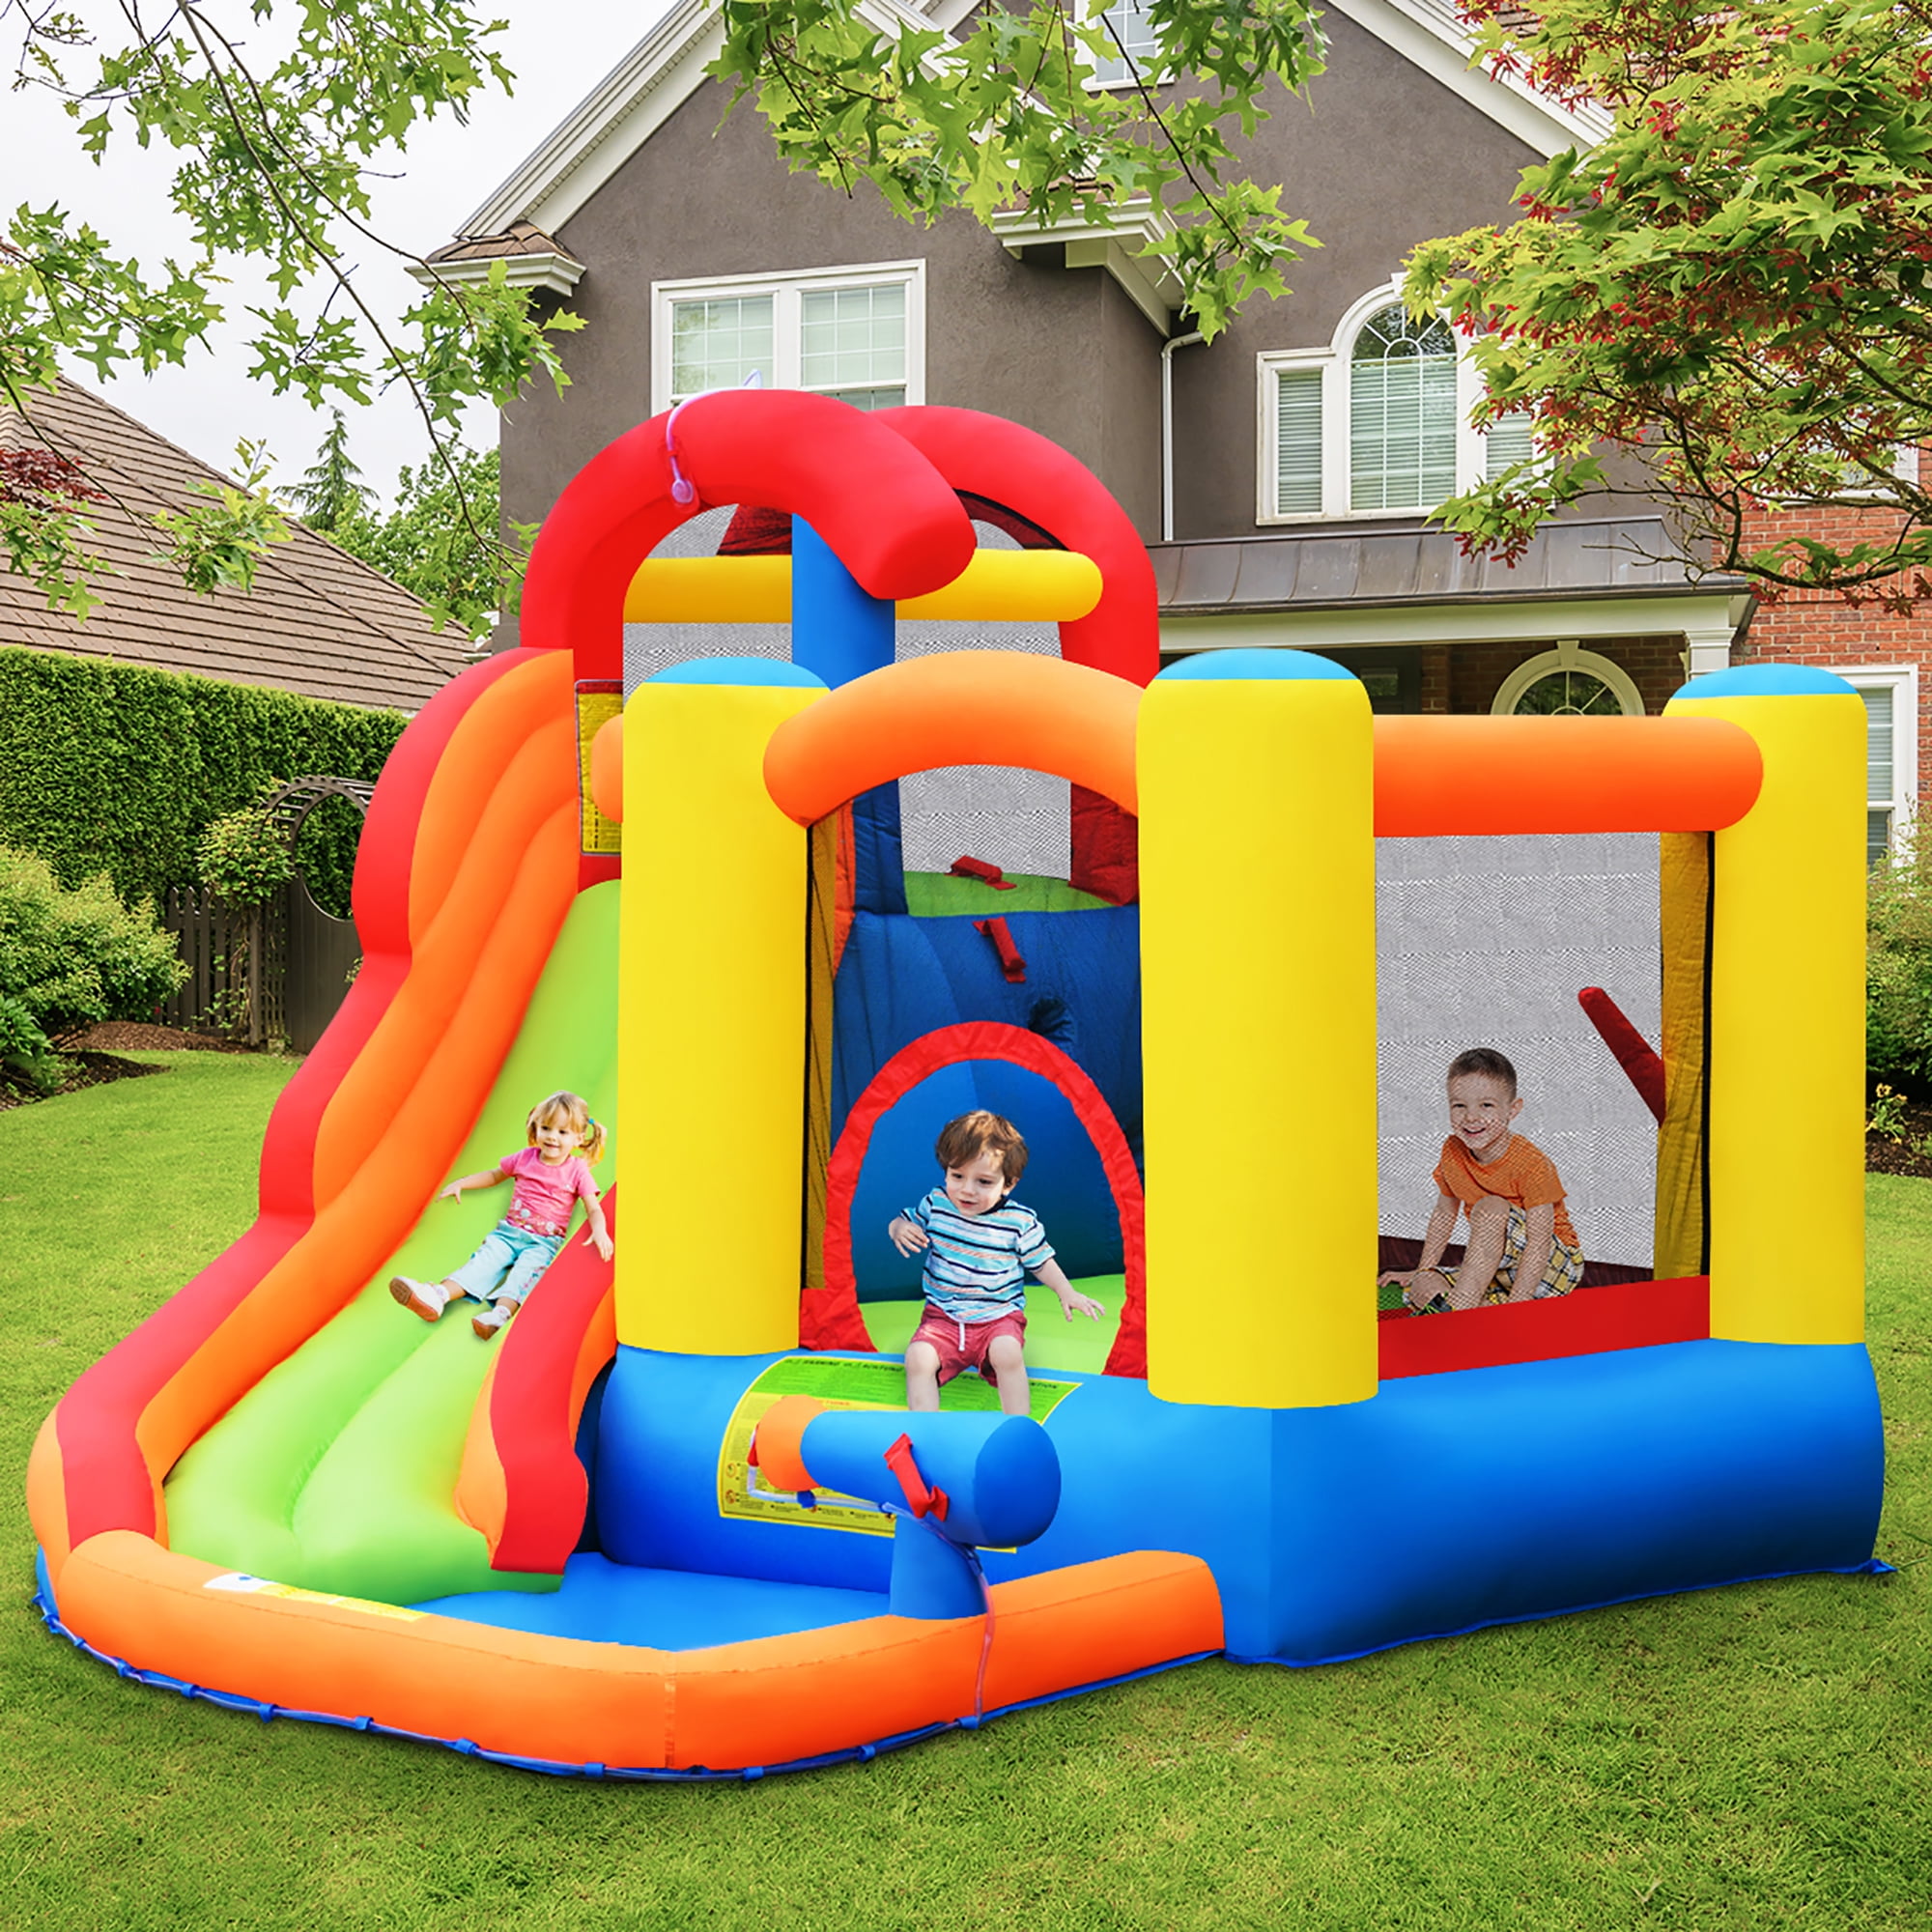 WATERJOY Kids Inflatable Castle，Jungle Kangaroo Slide Jumping Castle with 740W Blower,Bounce House Castle with Storage Bag for Outdoor Indoor Home Playground Garden Children Play with Blower 